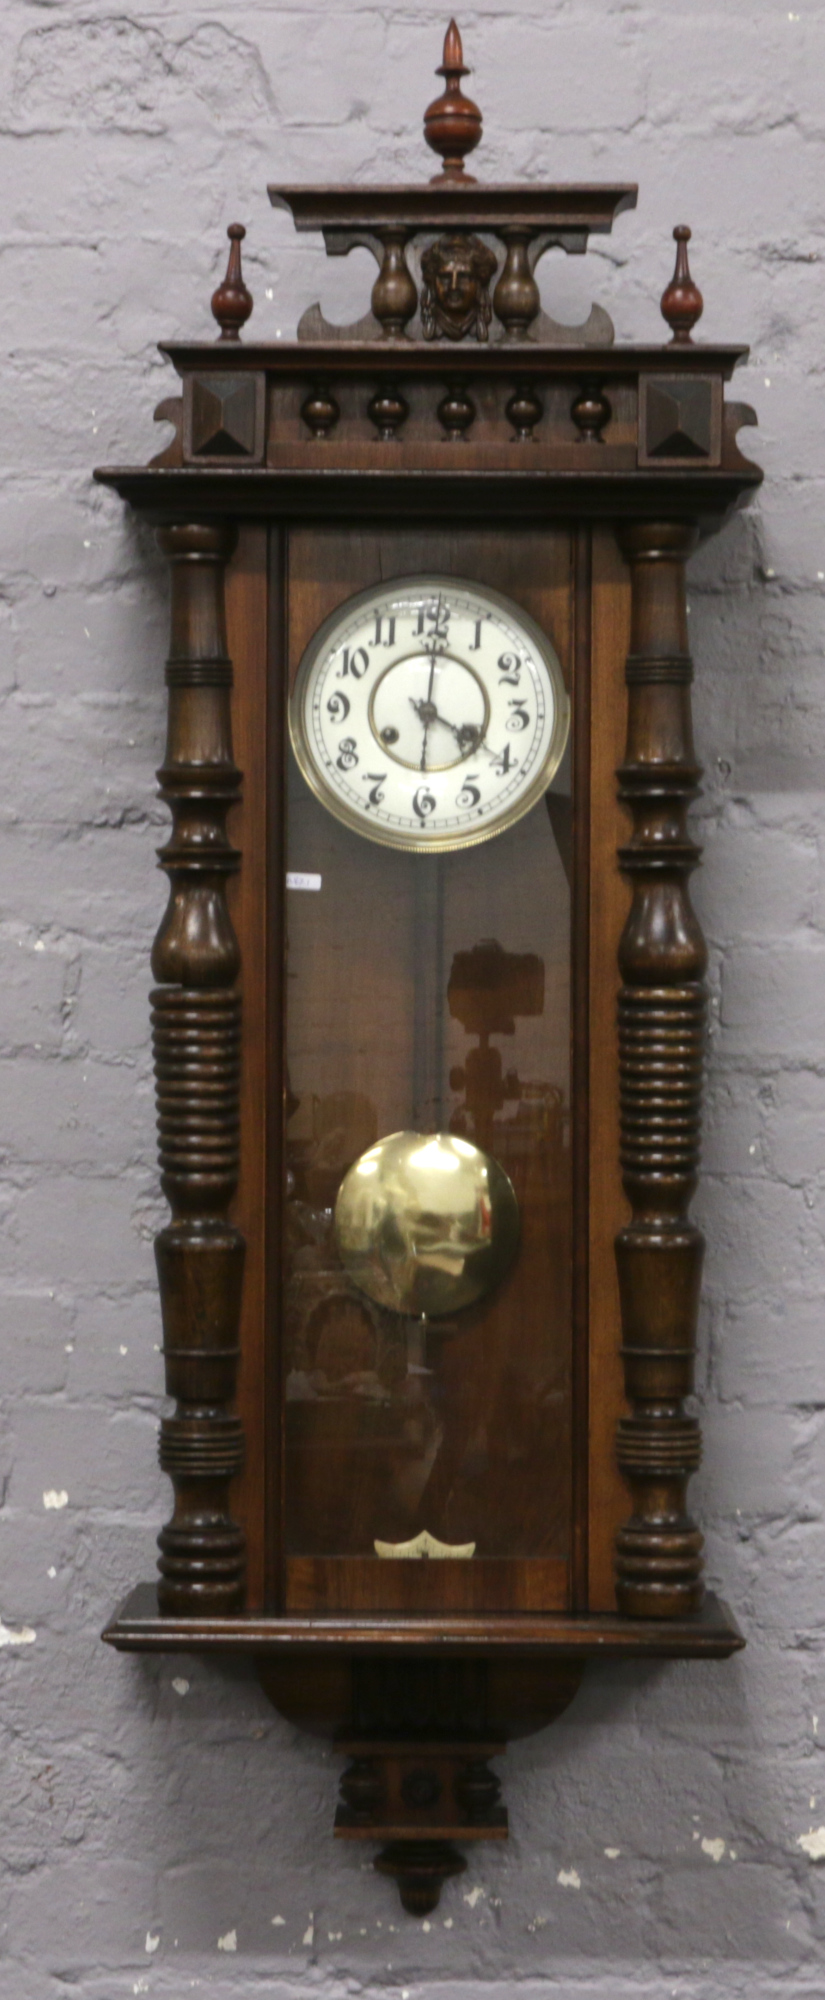 A mahogany cased Vienna Springer wall clock with white enamel dial chiming on a coiled gong.